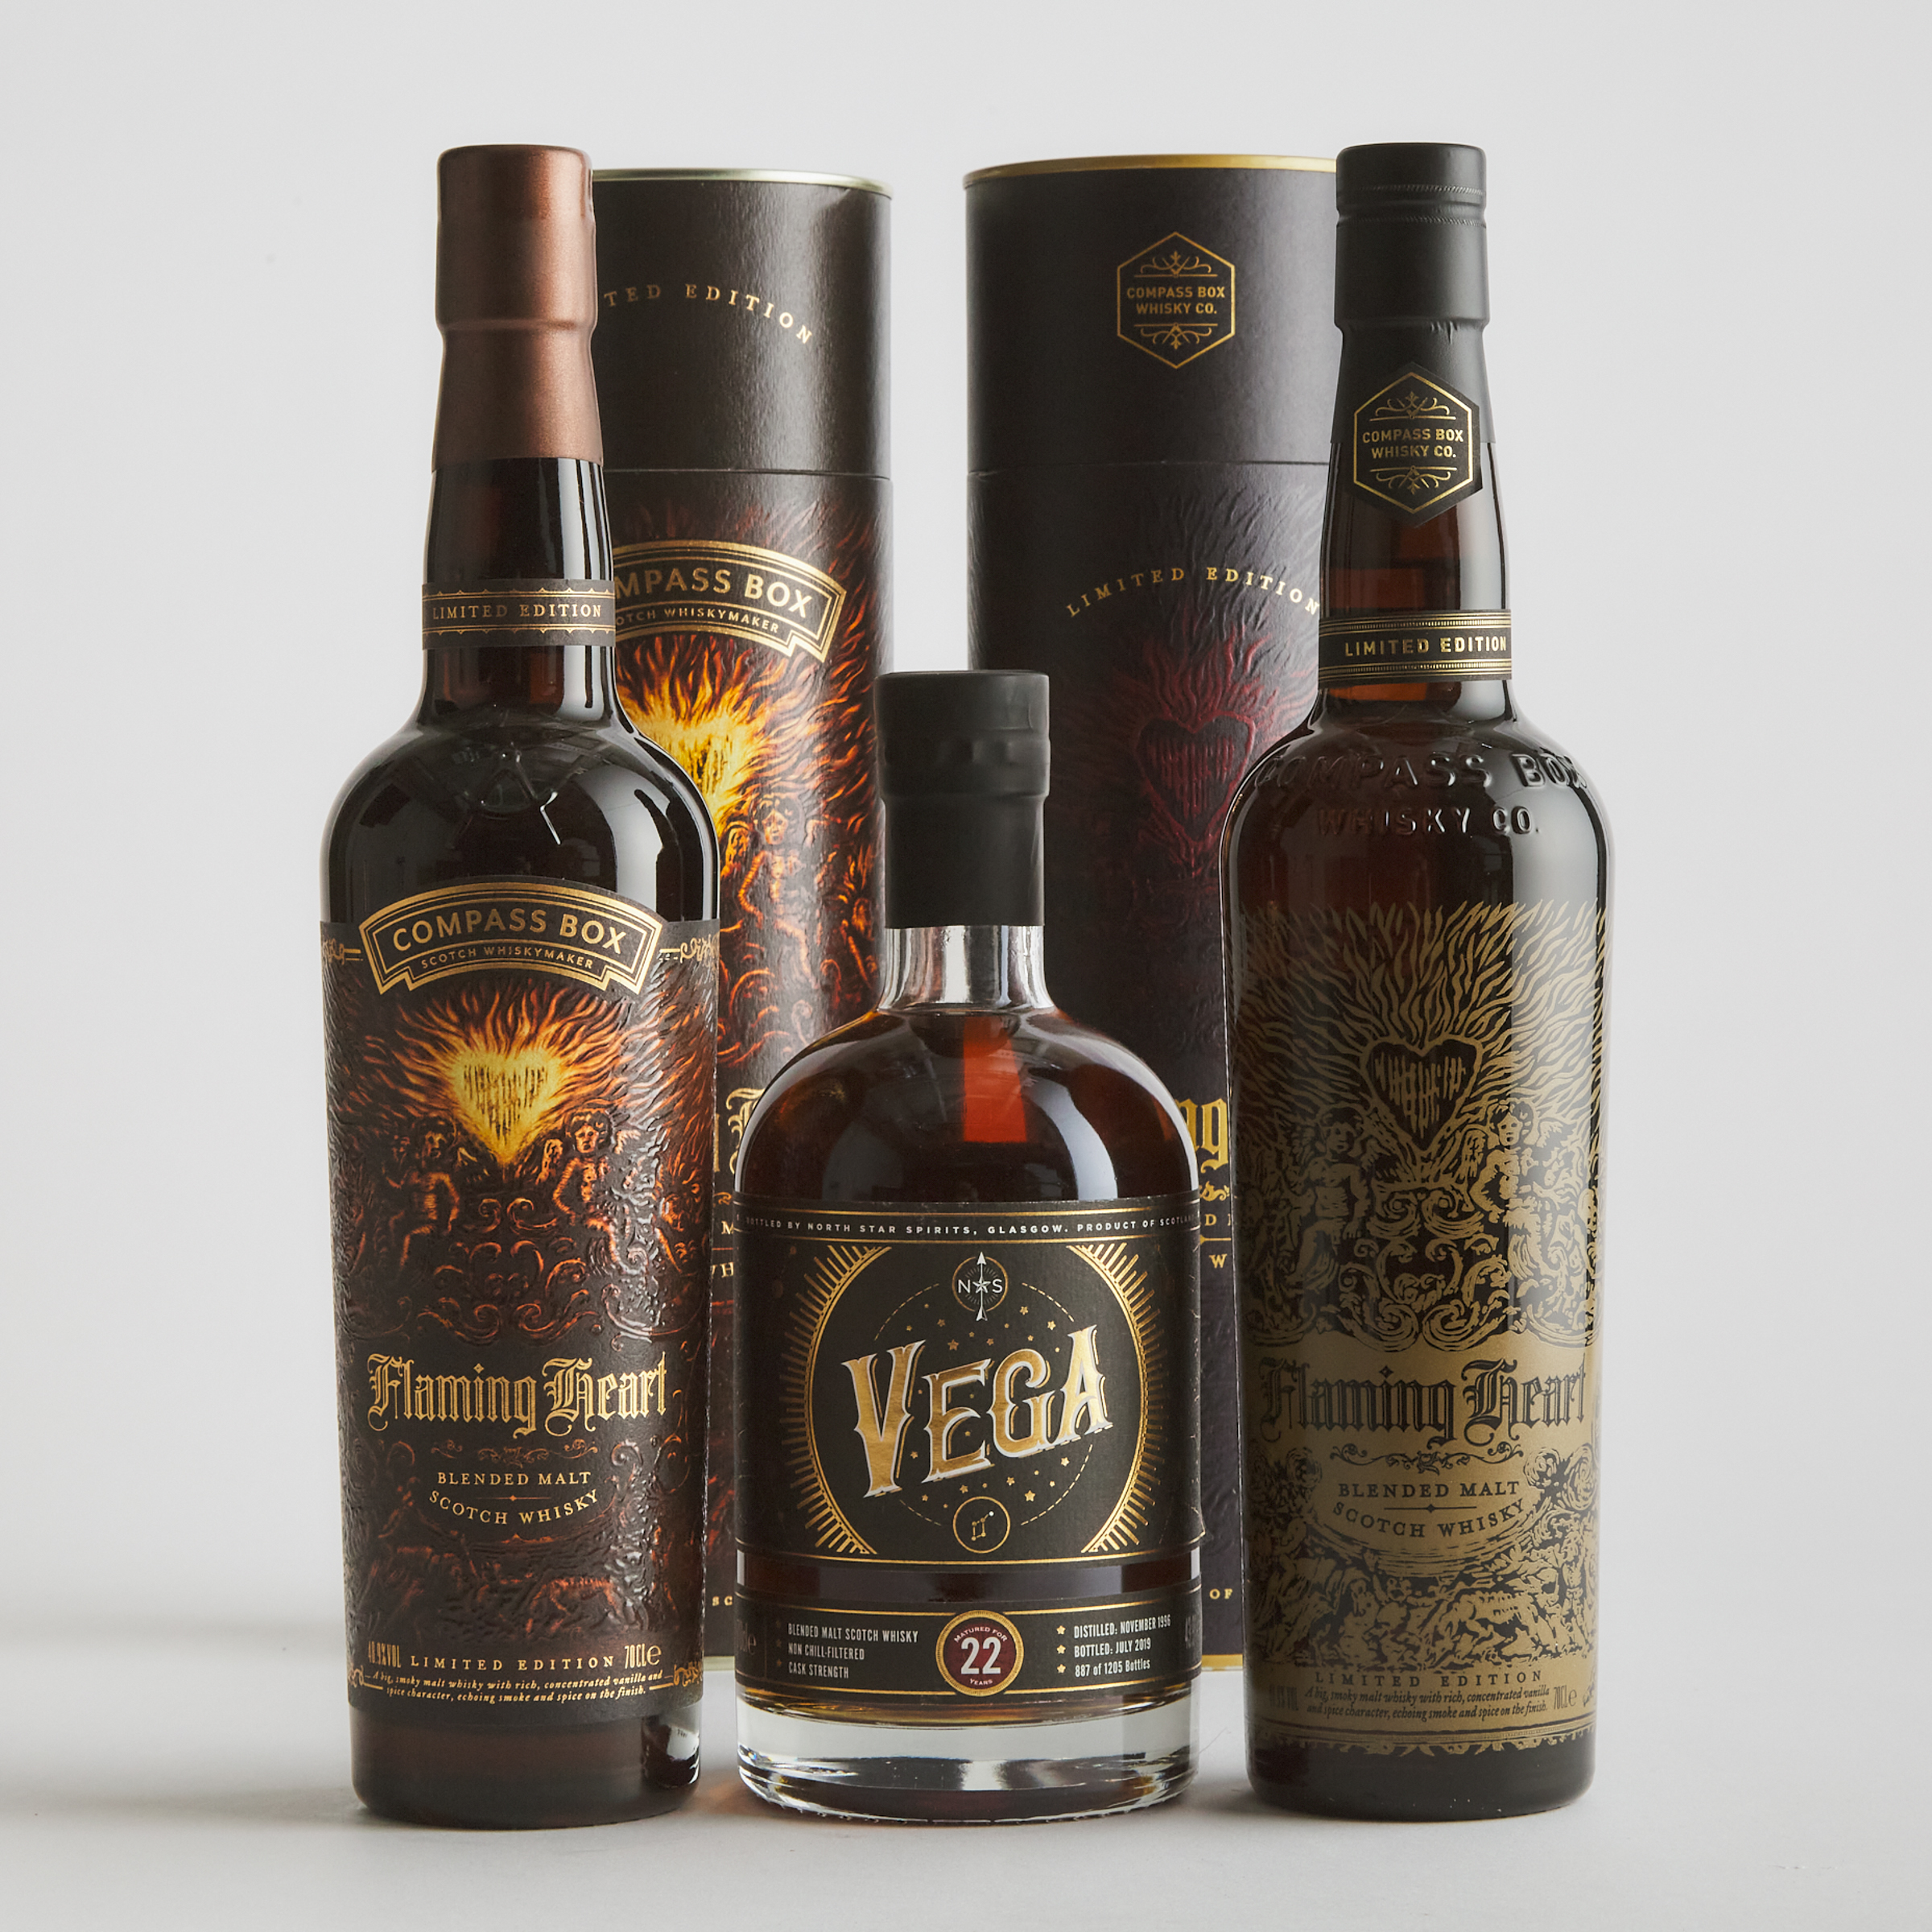 COMPASS BOX BLENDED SCOTCH WHISKY NAS (ONE 70 CL)
COMPASS BOX BLENDED SCOTCH WHISKY NAS (ONE 70 CL)
VEGA BLENDED MALT SCOTCH WHISKY 22 YEARS (ONE 70 CL)